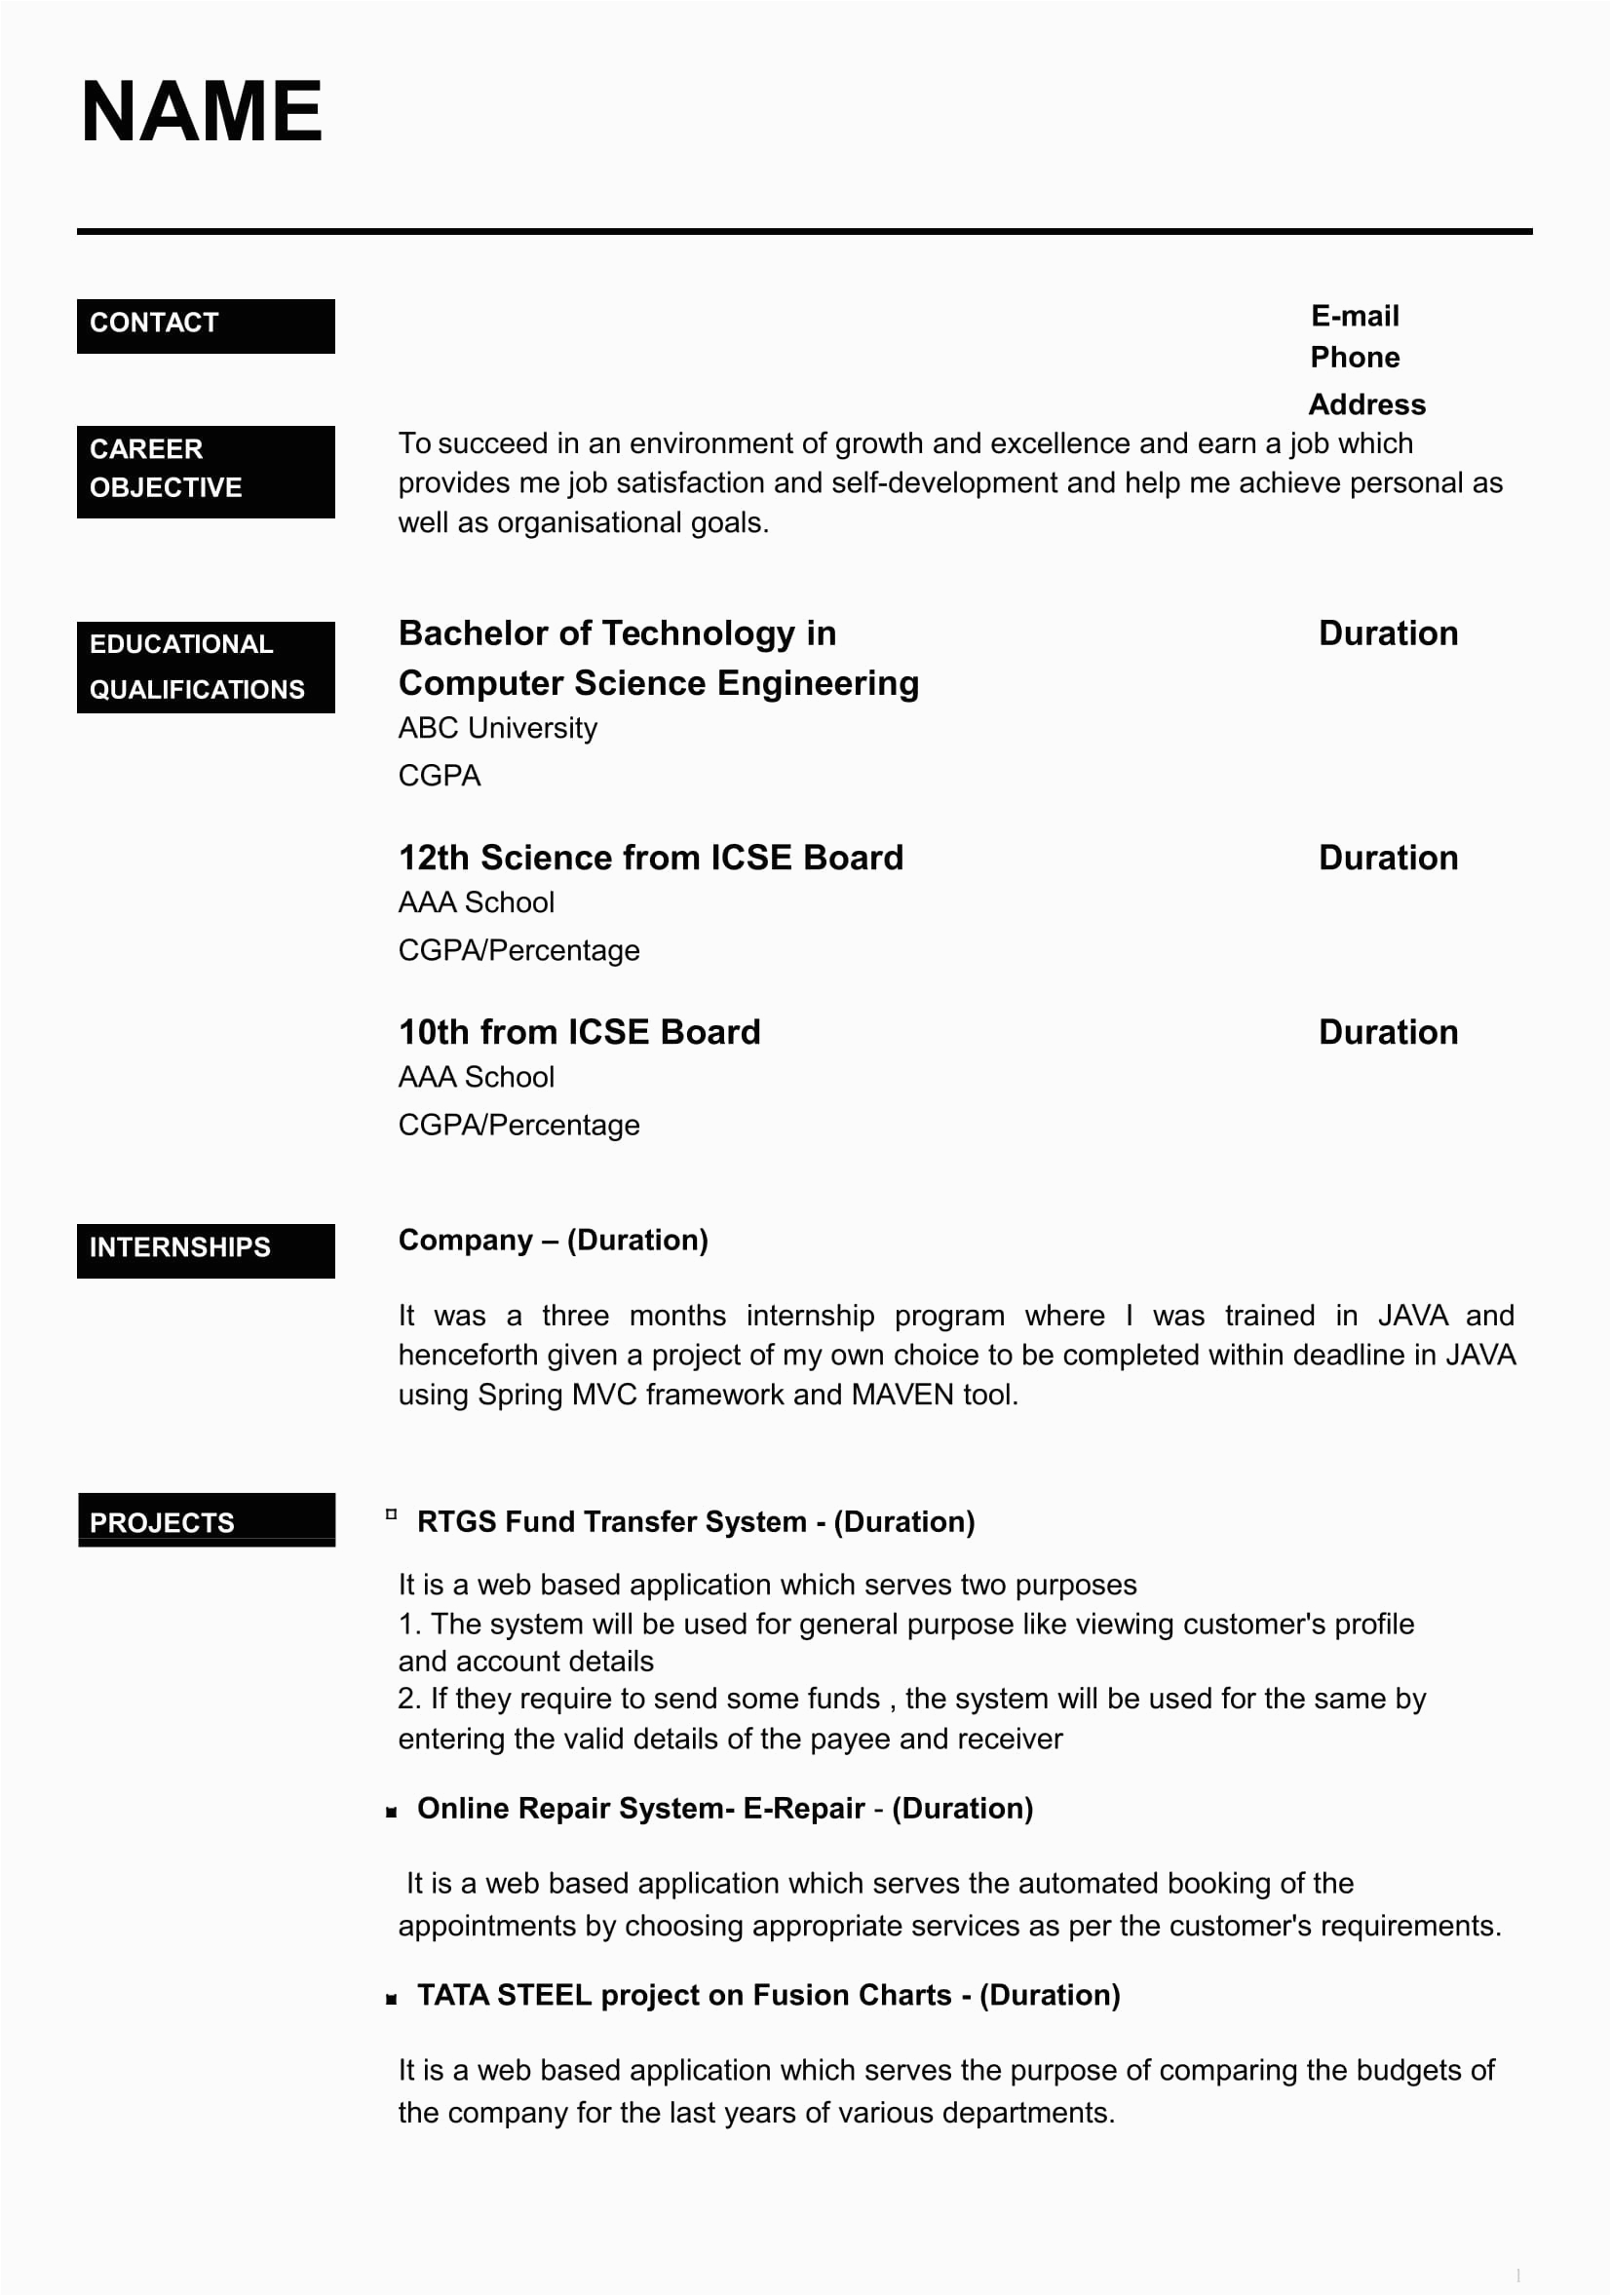 Resume Template for Freshers with Photo Resume formats for 2020